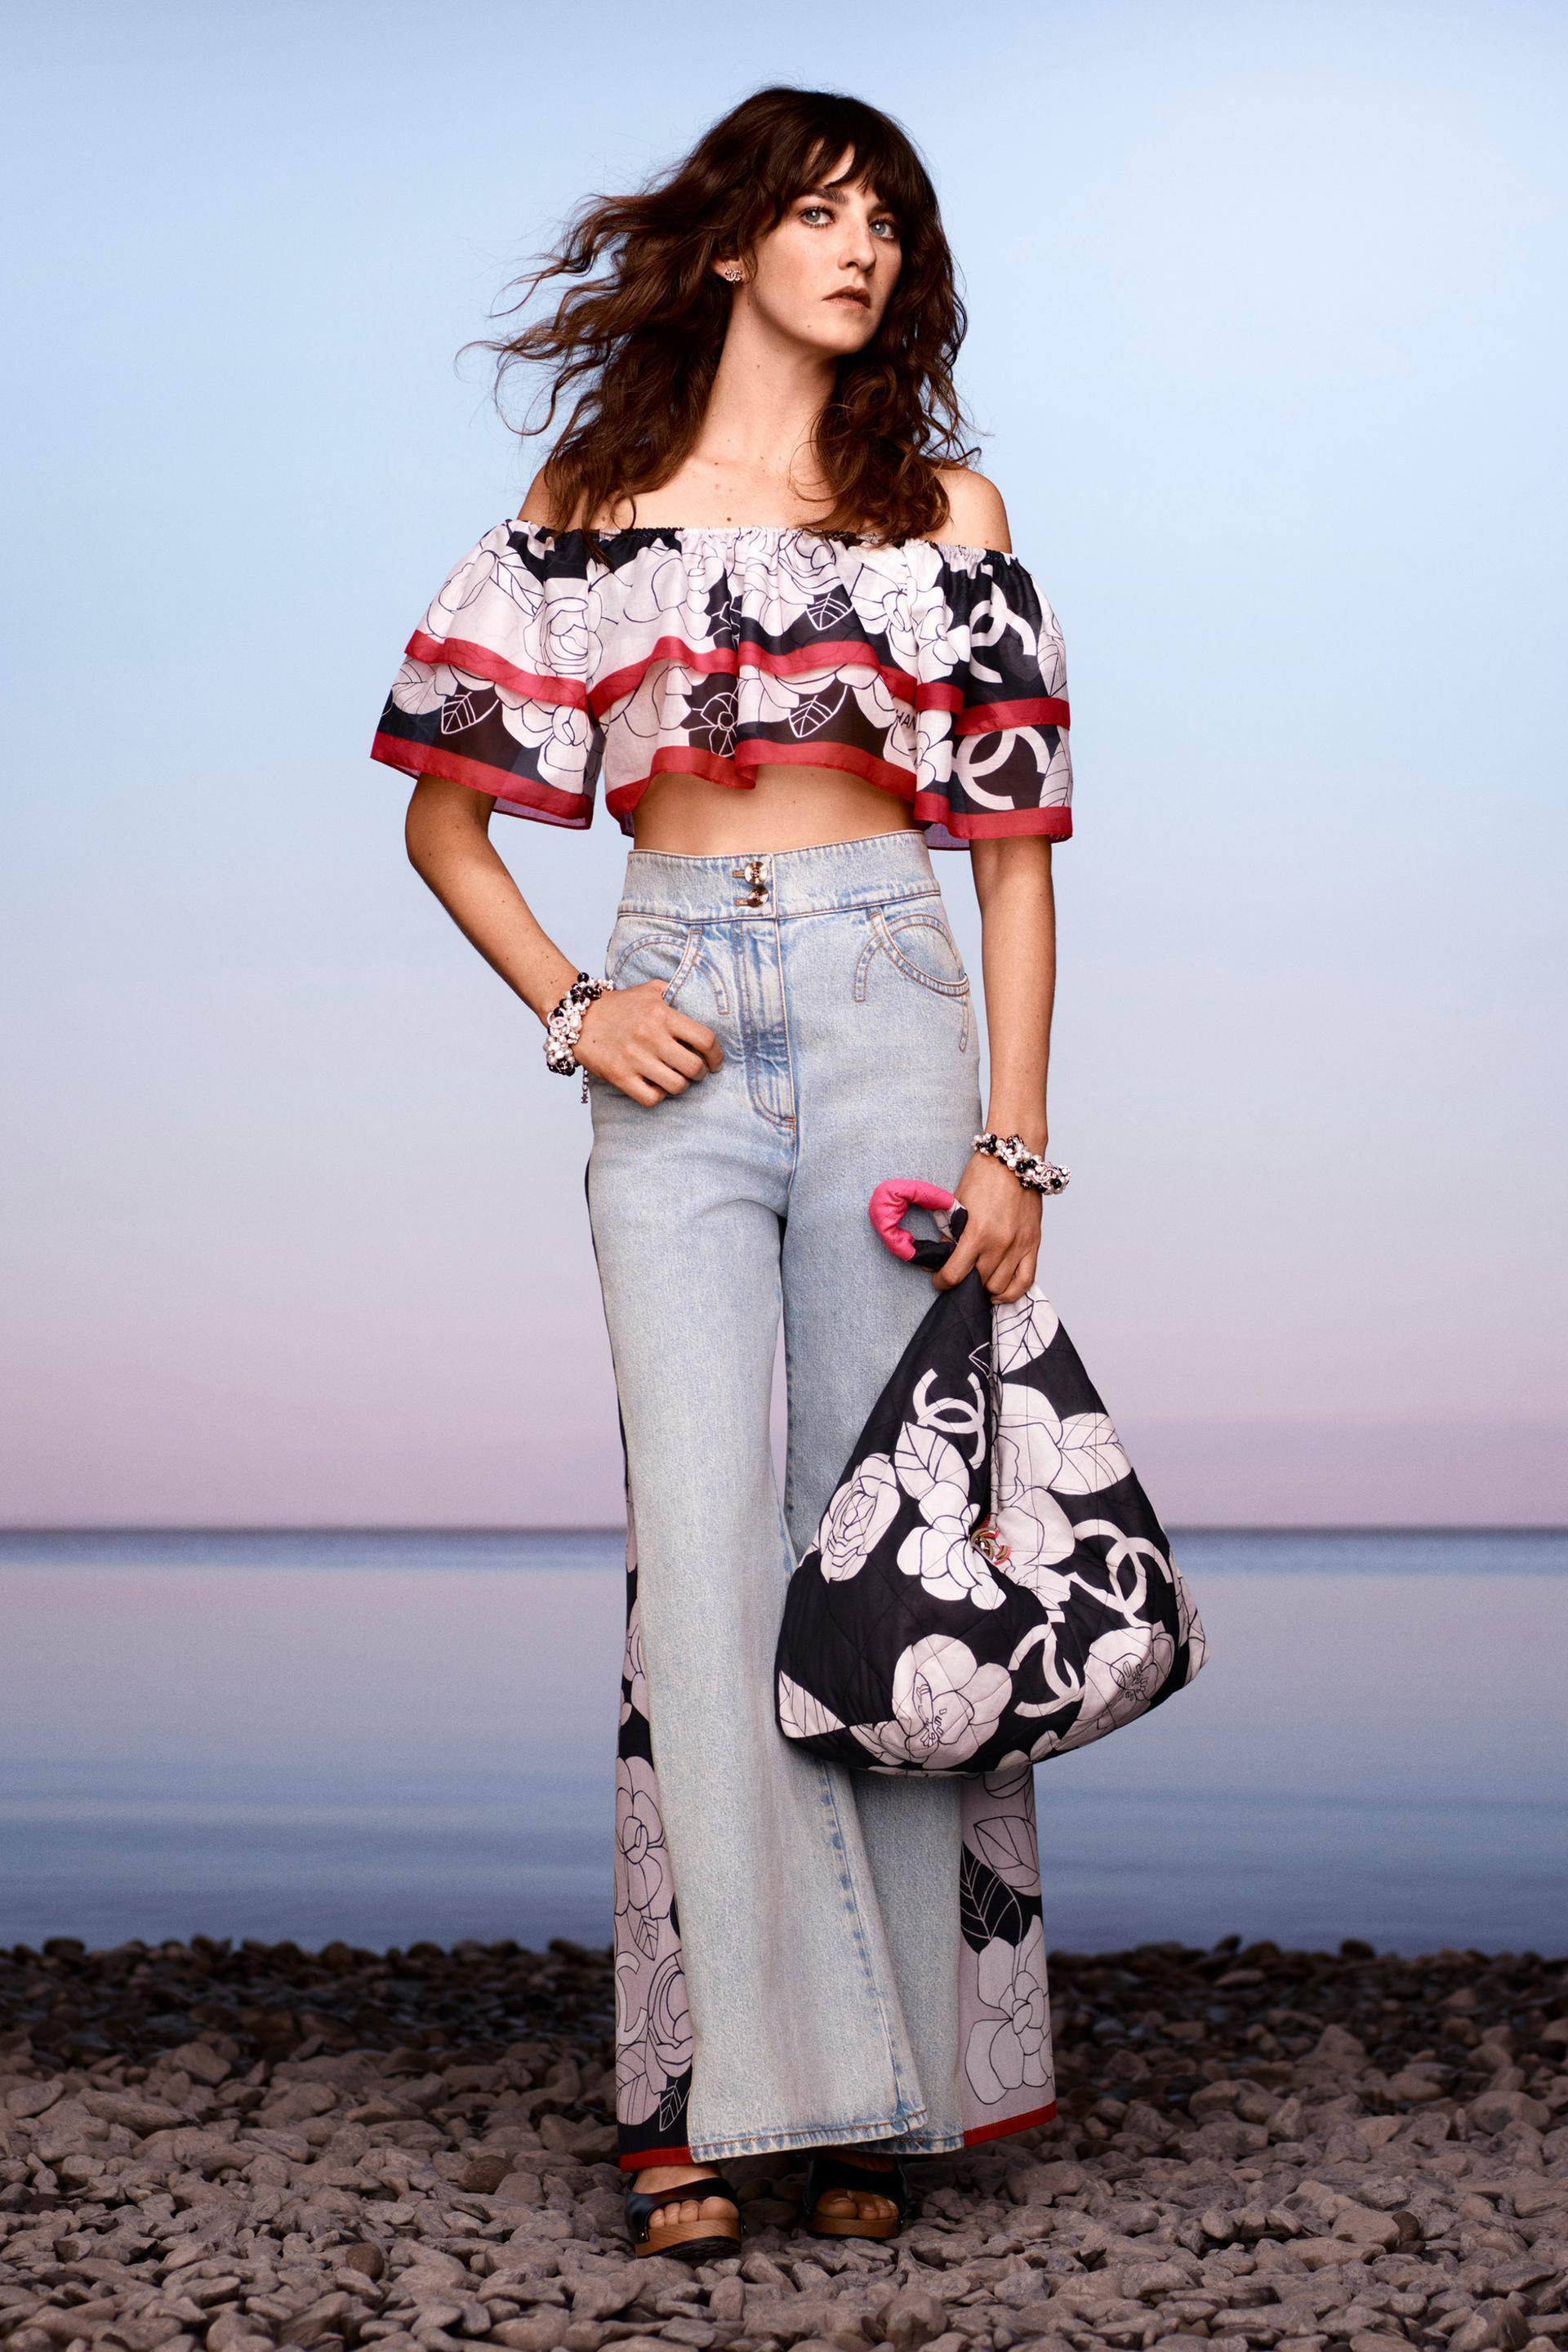 Chanel Swaps Out Runway Presentation In Capris For Ho-Hum Resort